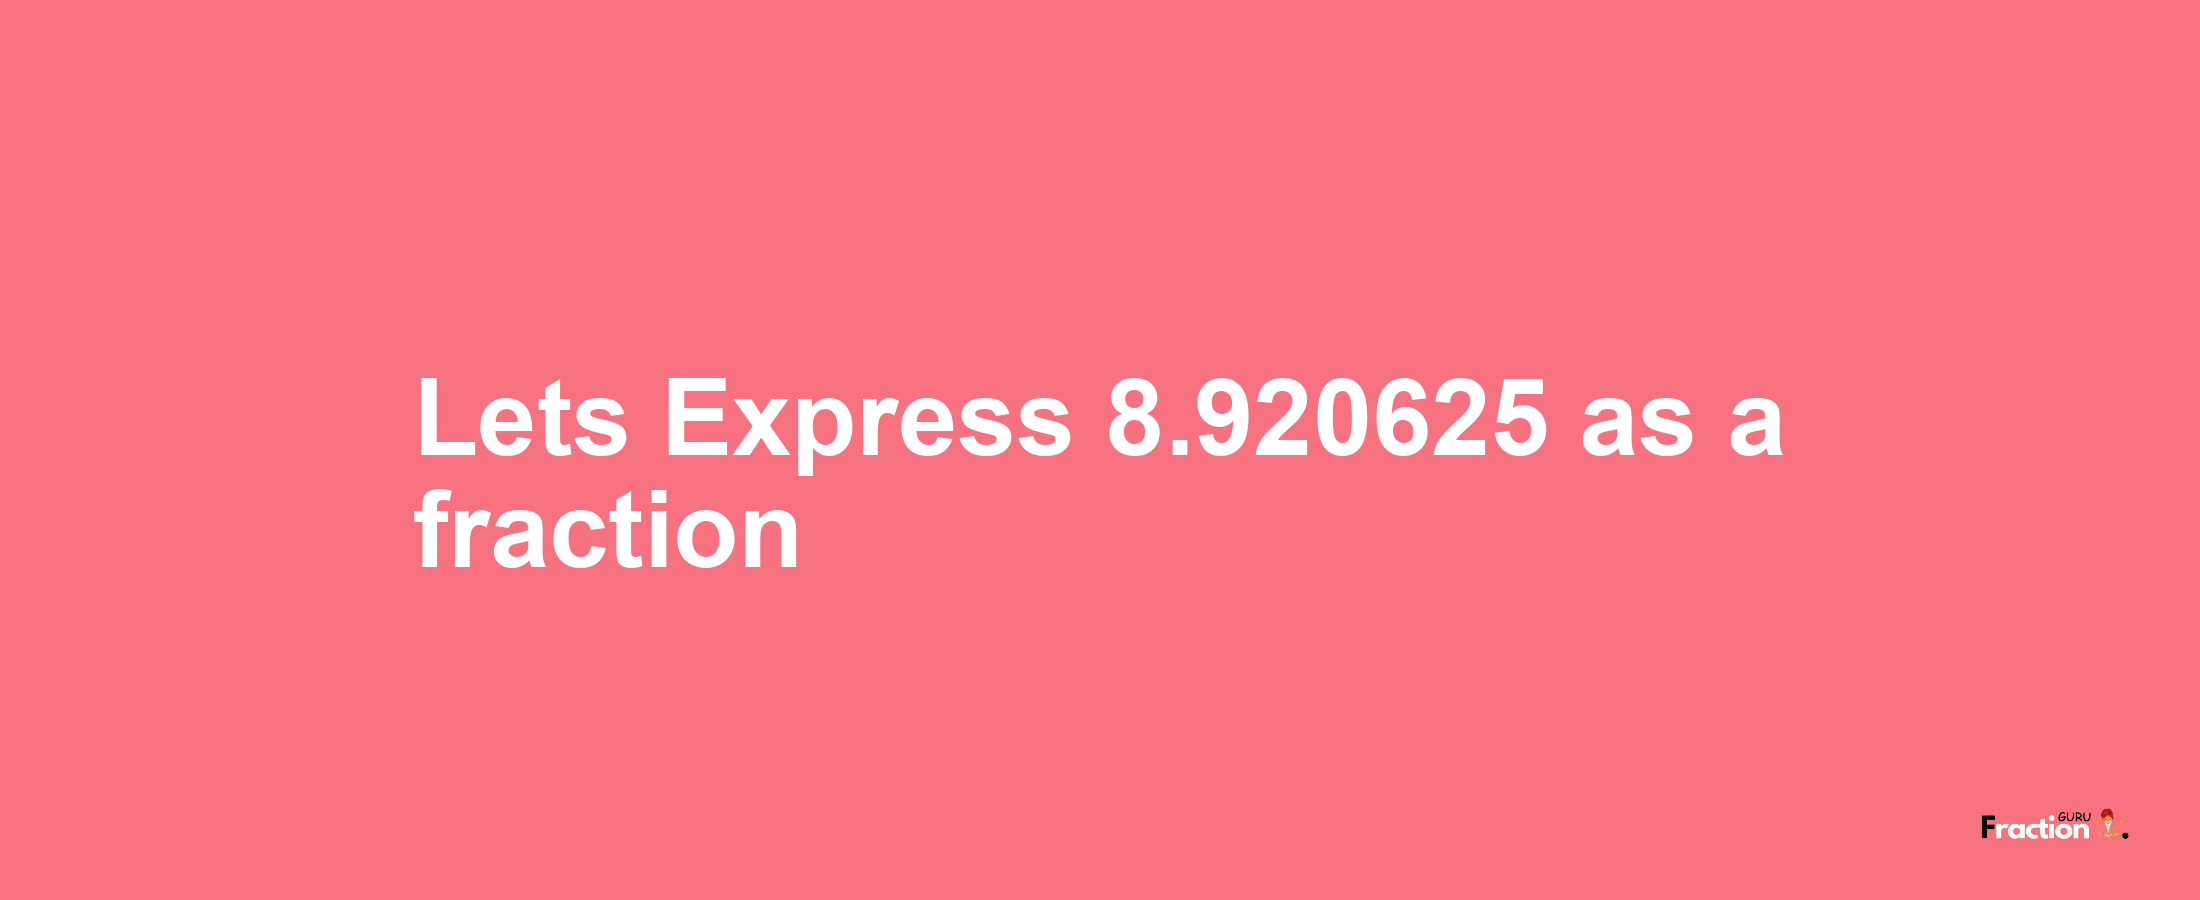 Lets Express 8.920625 as afraction